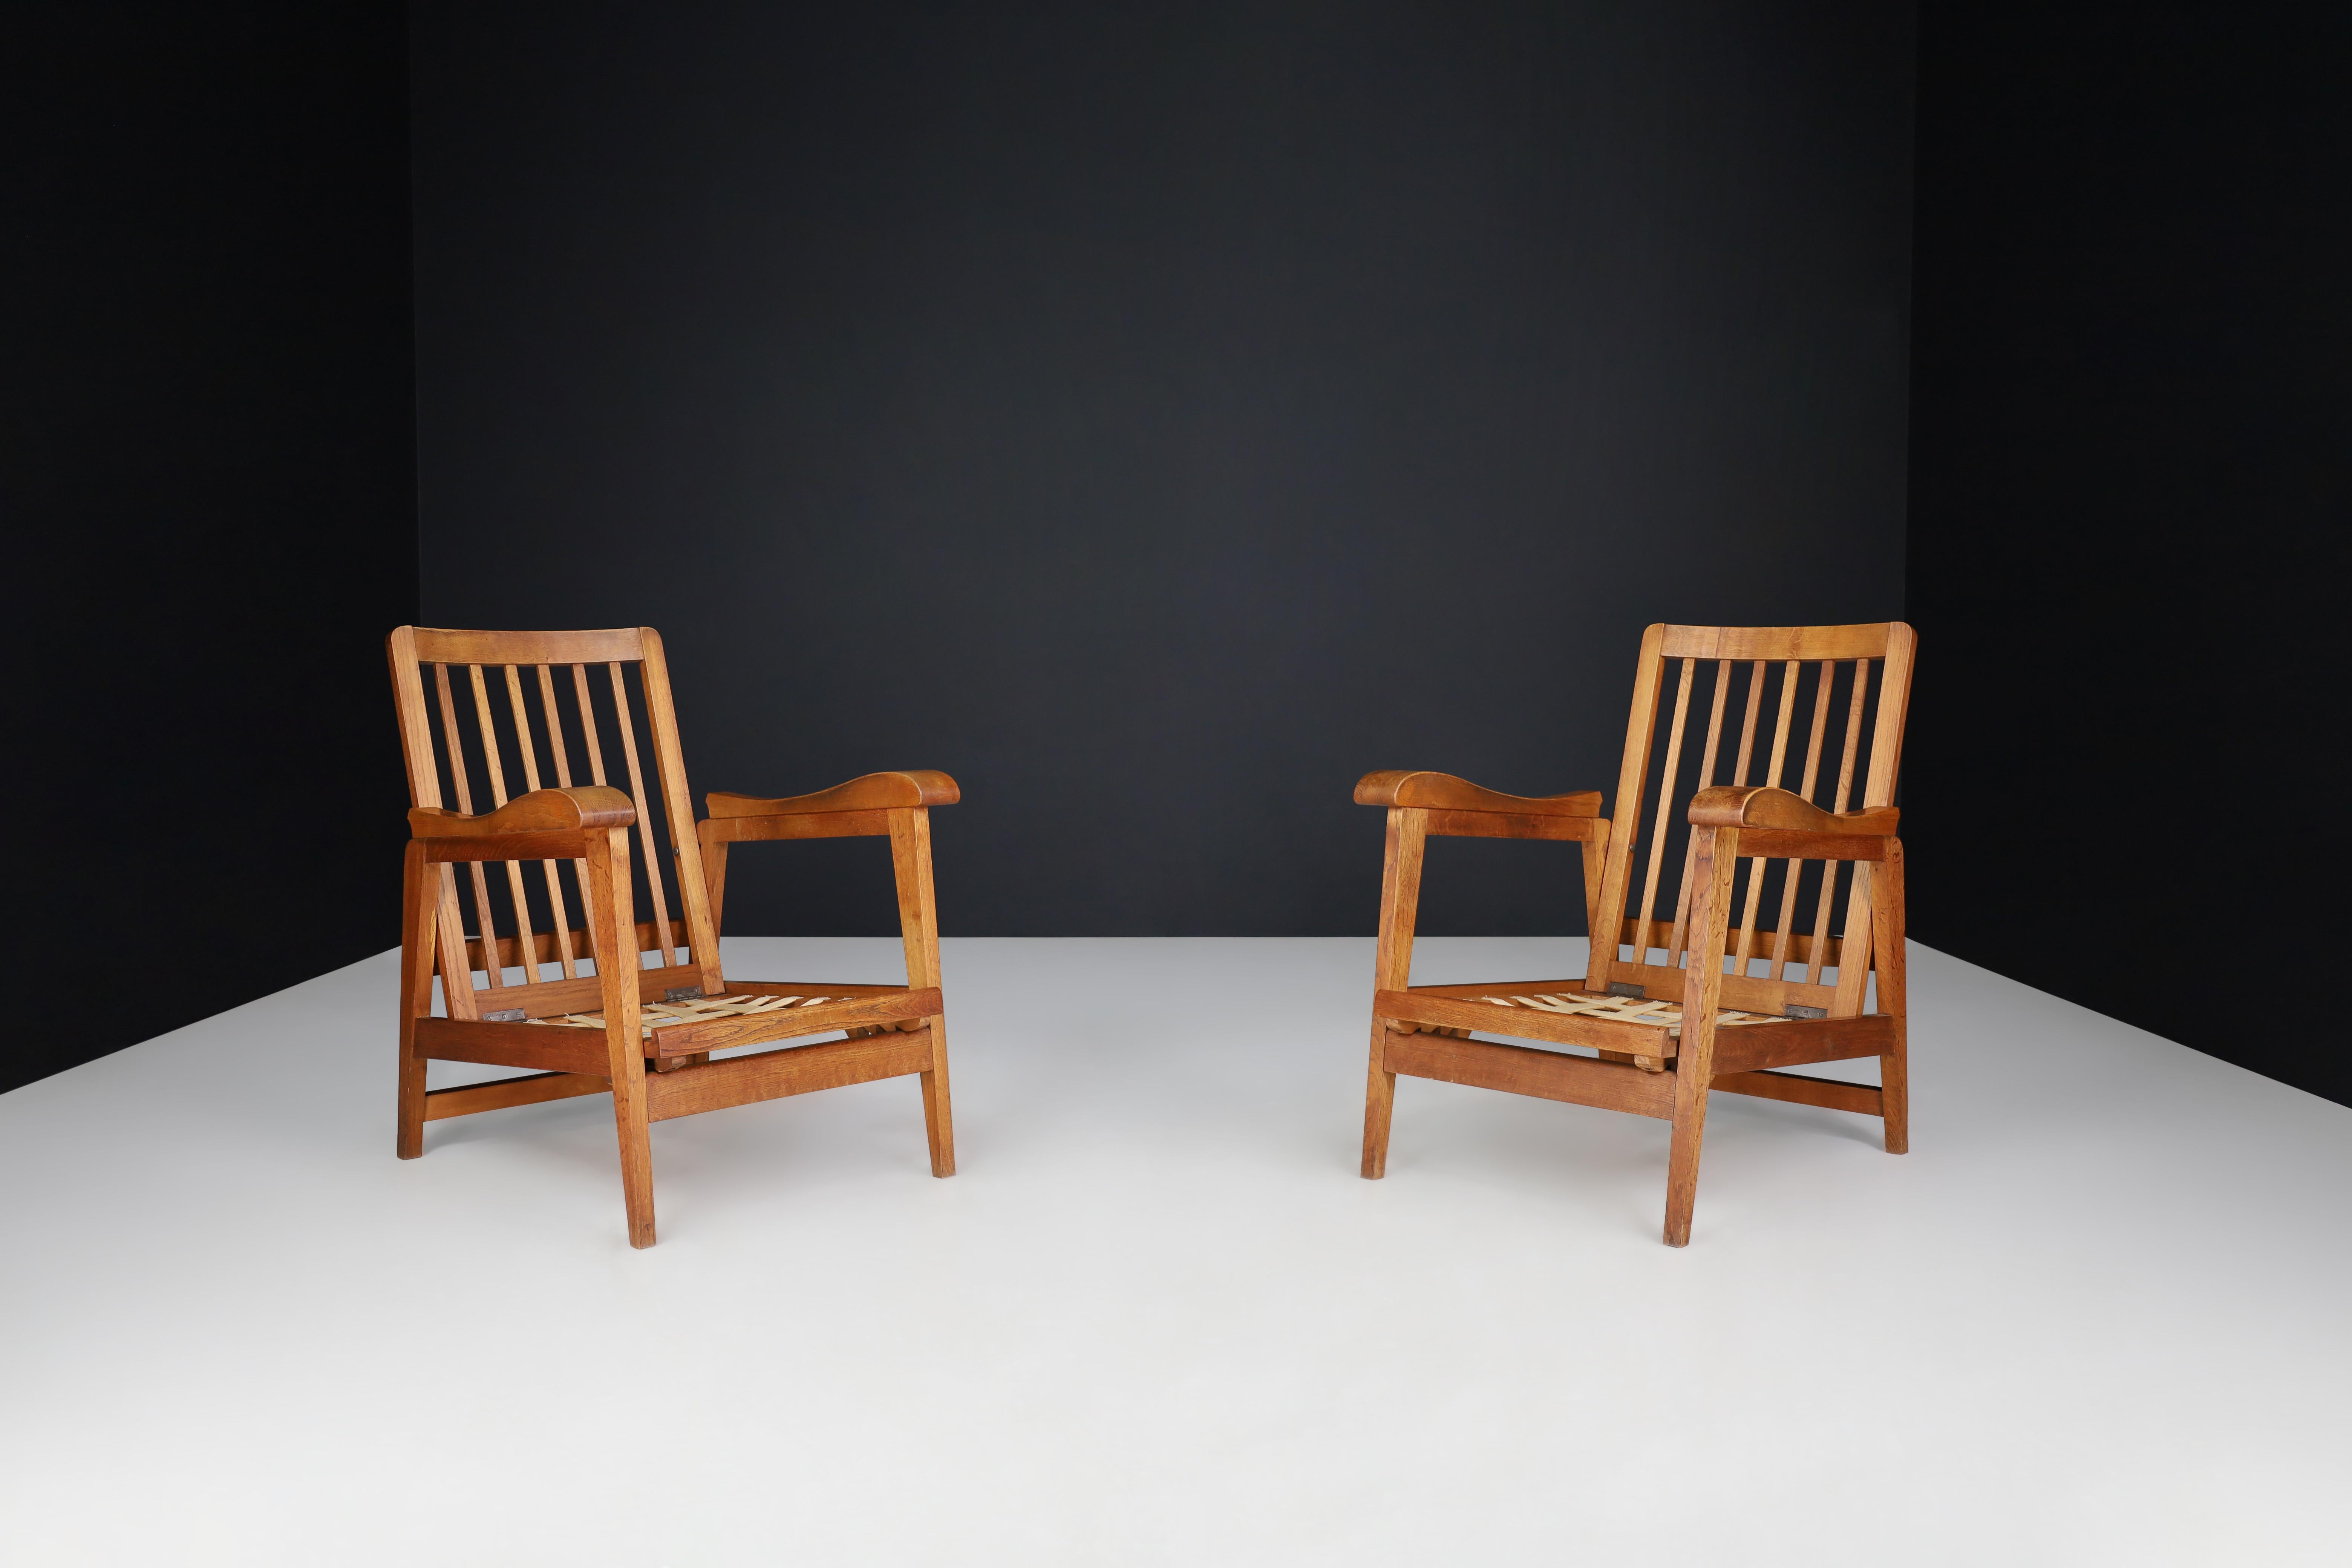 Brutalist Sculptural Adjustable Lounge Chairs in Oak set of 2 , France, 1950s

Here is a description of a pair of two original midcentury sculptural adjustable armchairs that were manufactured and designed in France in the 1950s. These armchairs are